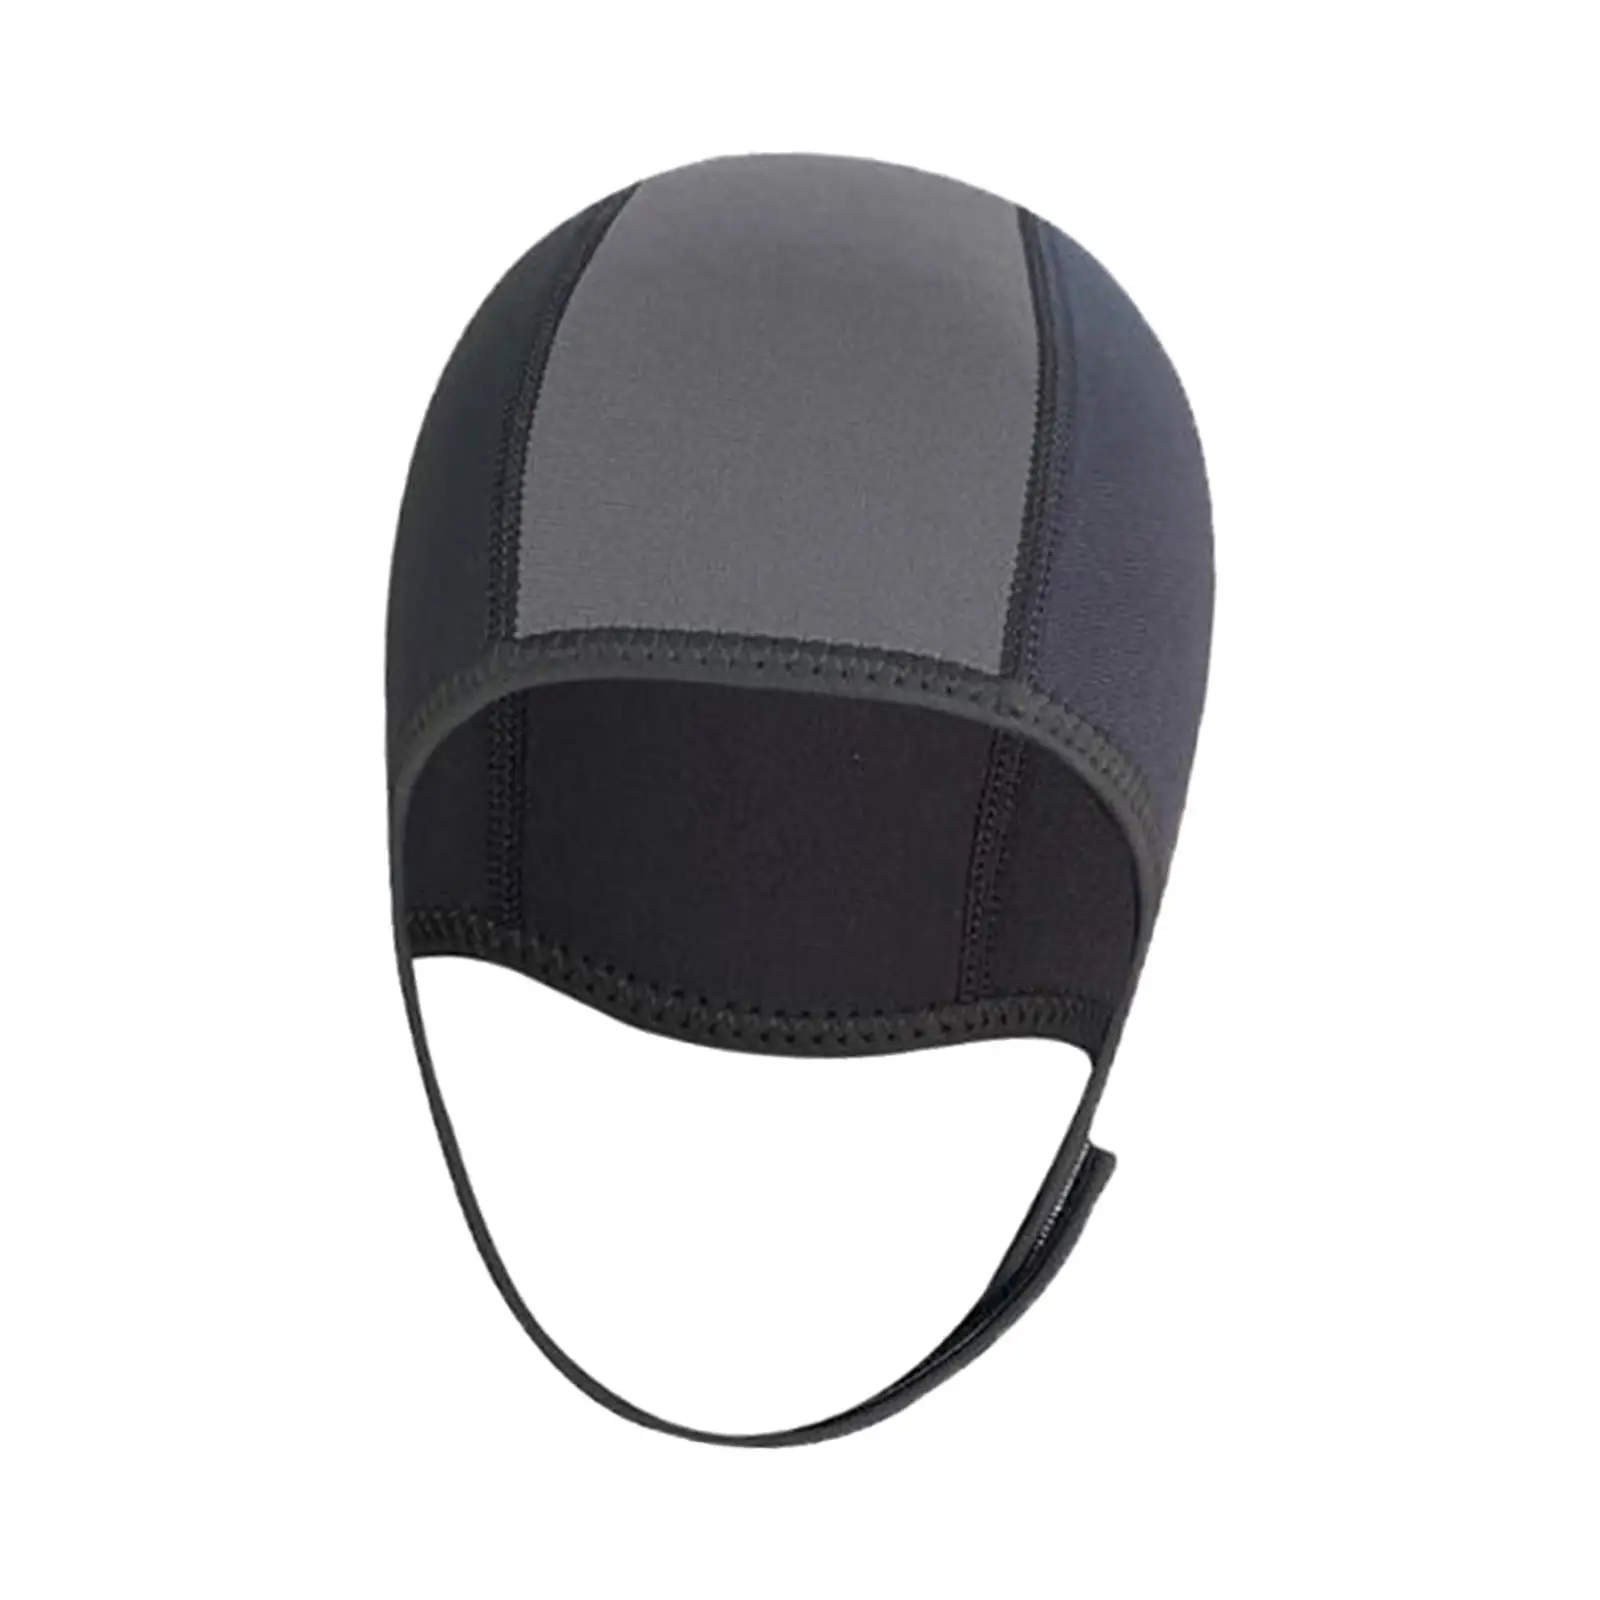 Thermal Diving Hood Surfing Neoprene Stretchy Adult Head Protection Hat